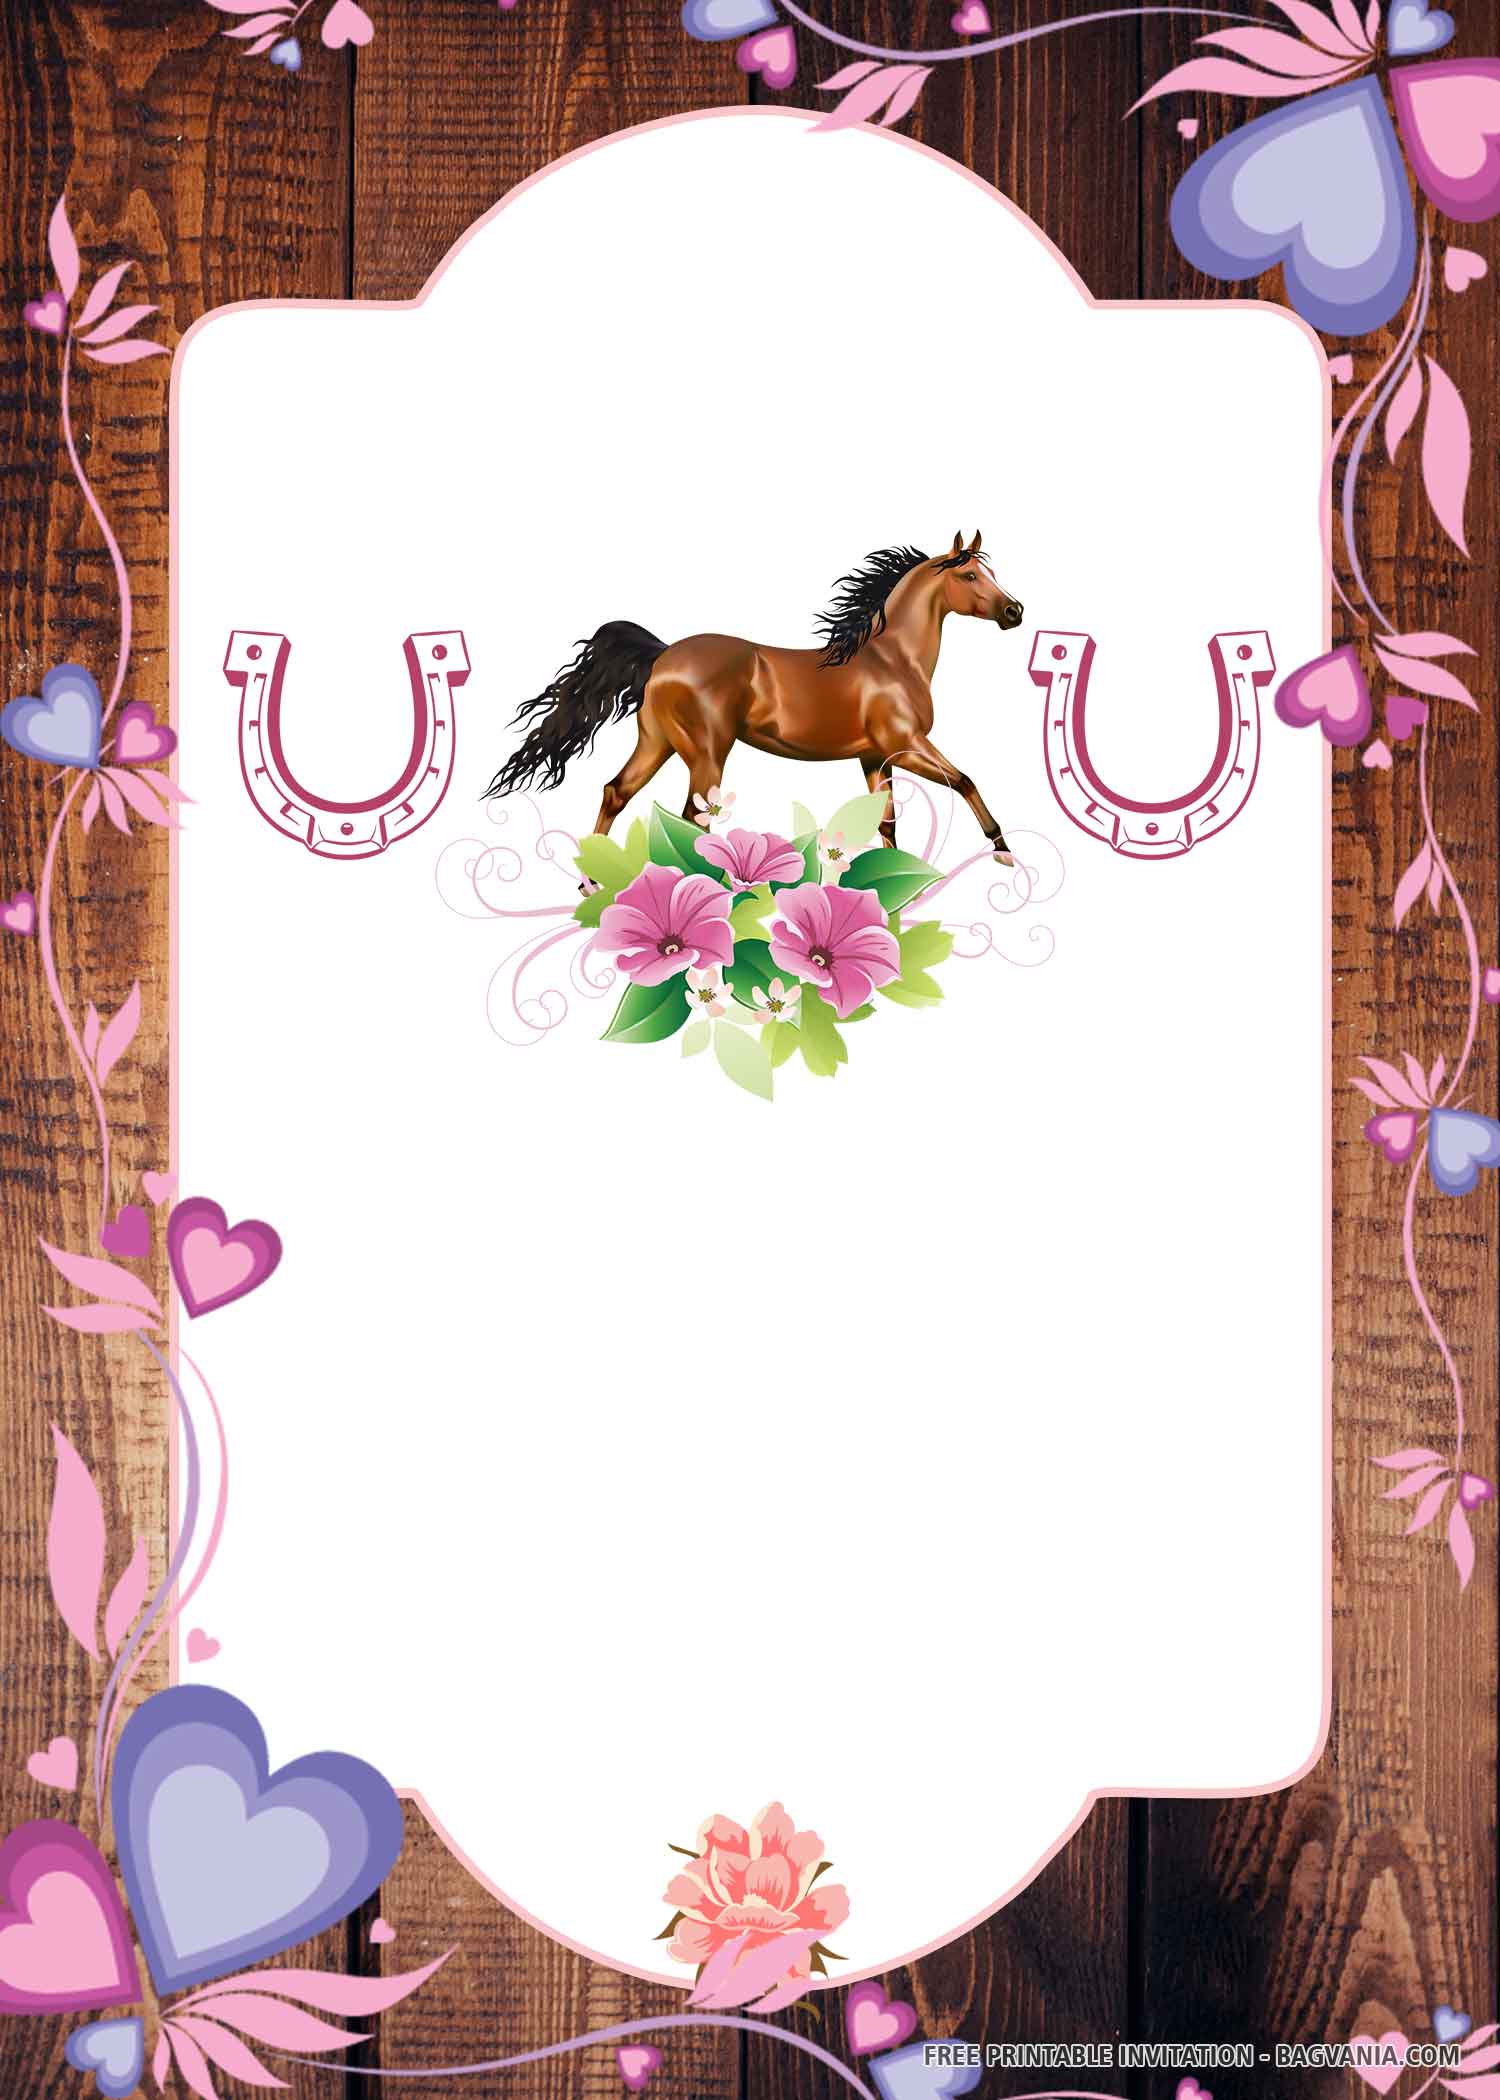 FREE Pink Horse with Horseshoes, Blue and Pink Hearts, Wood Background